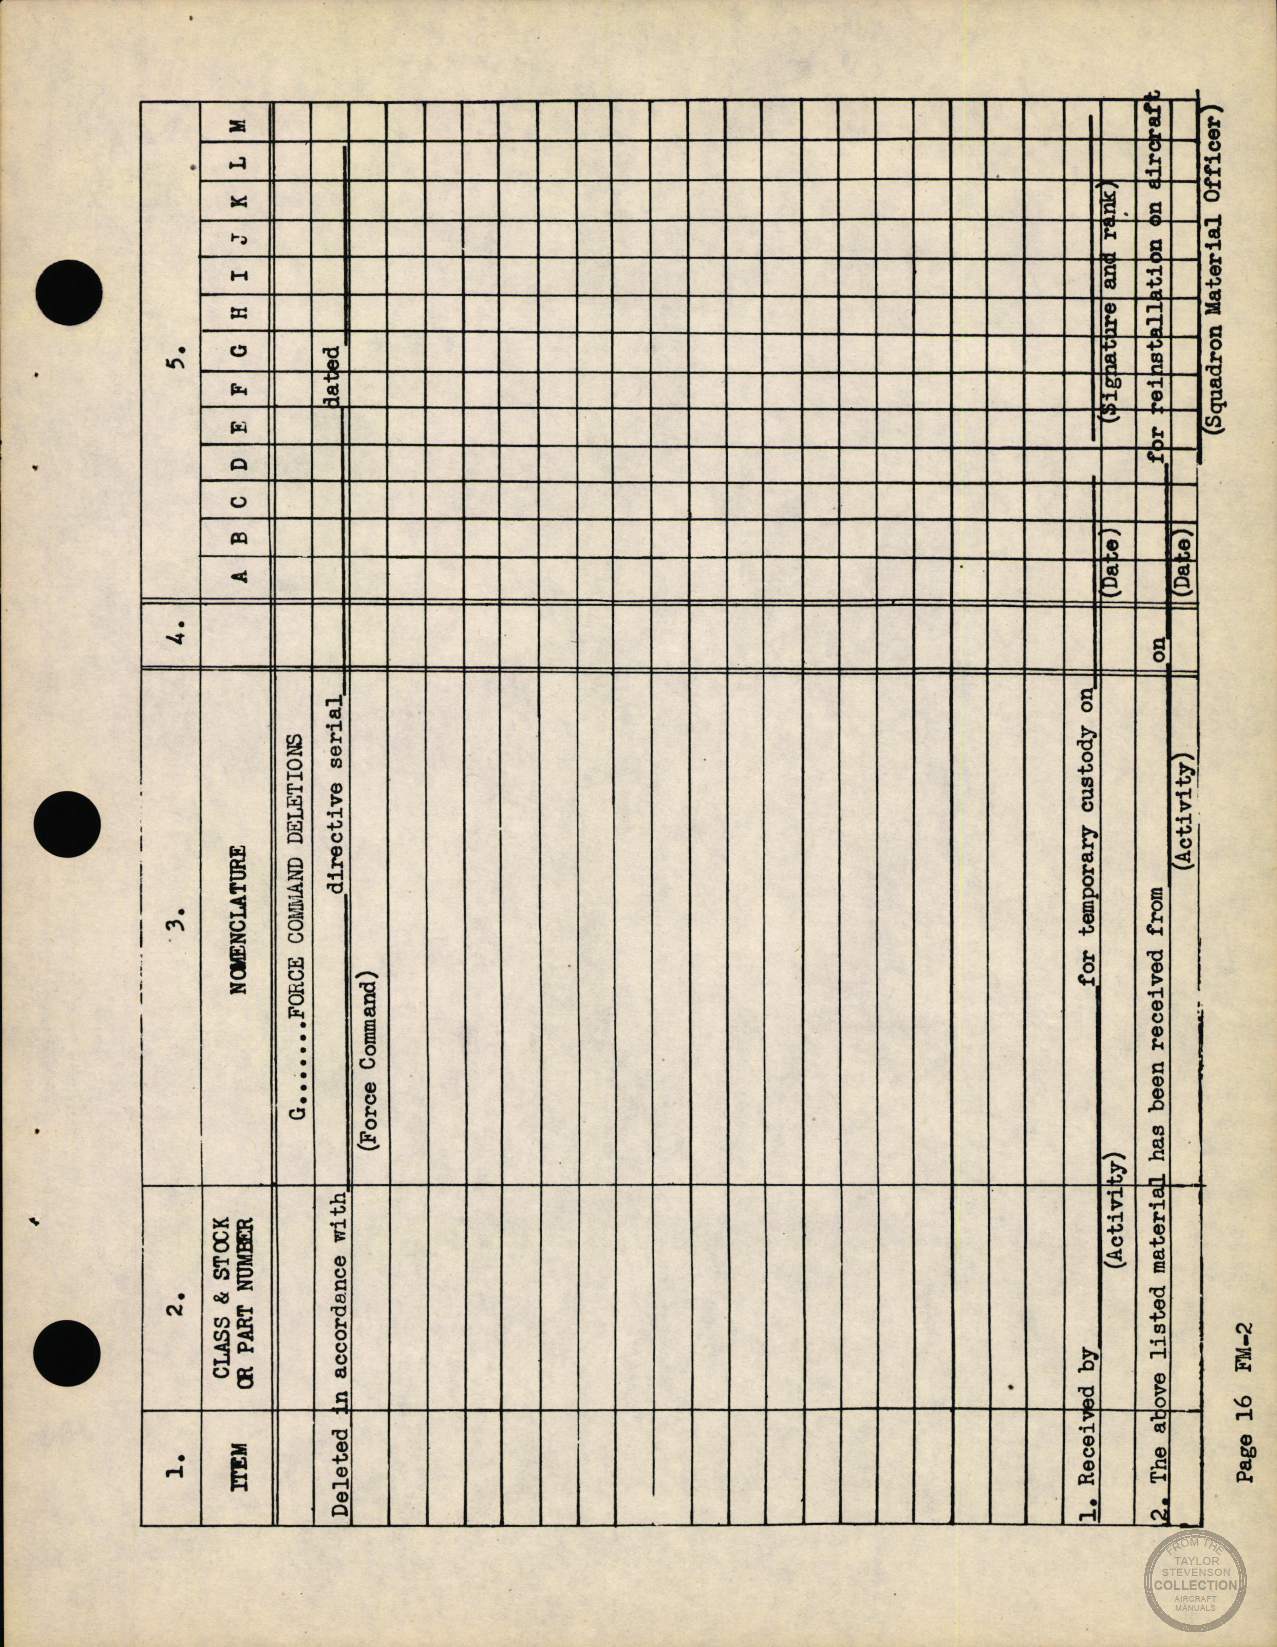 Sample page 21 from AirCorps Library document: Bureau of Aeronautics Standard Inventory Log, FM-2 Wildcat